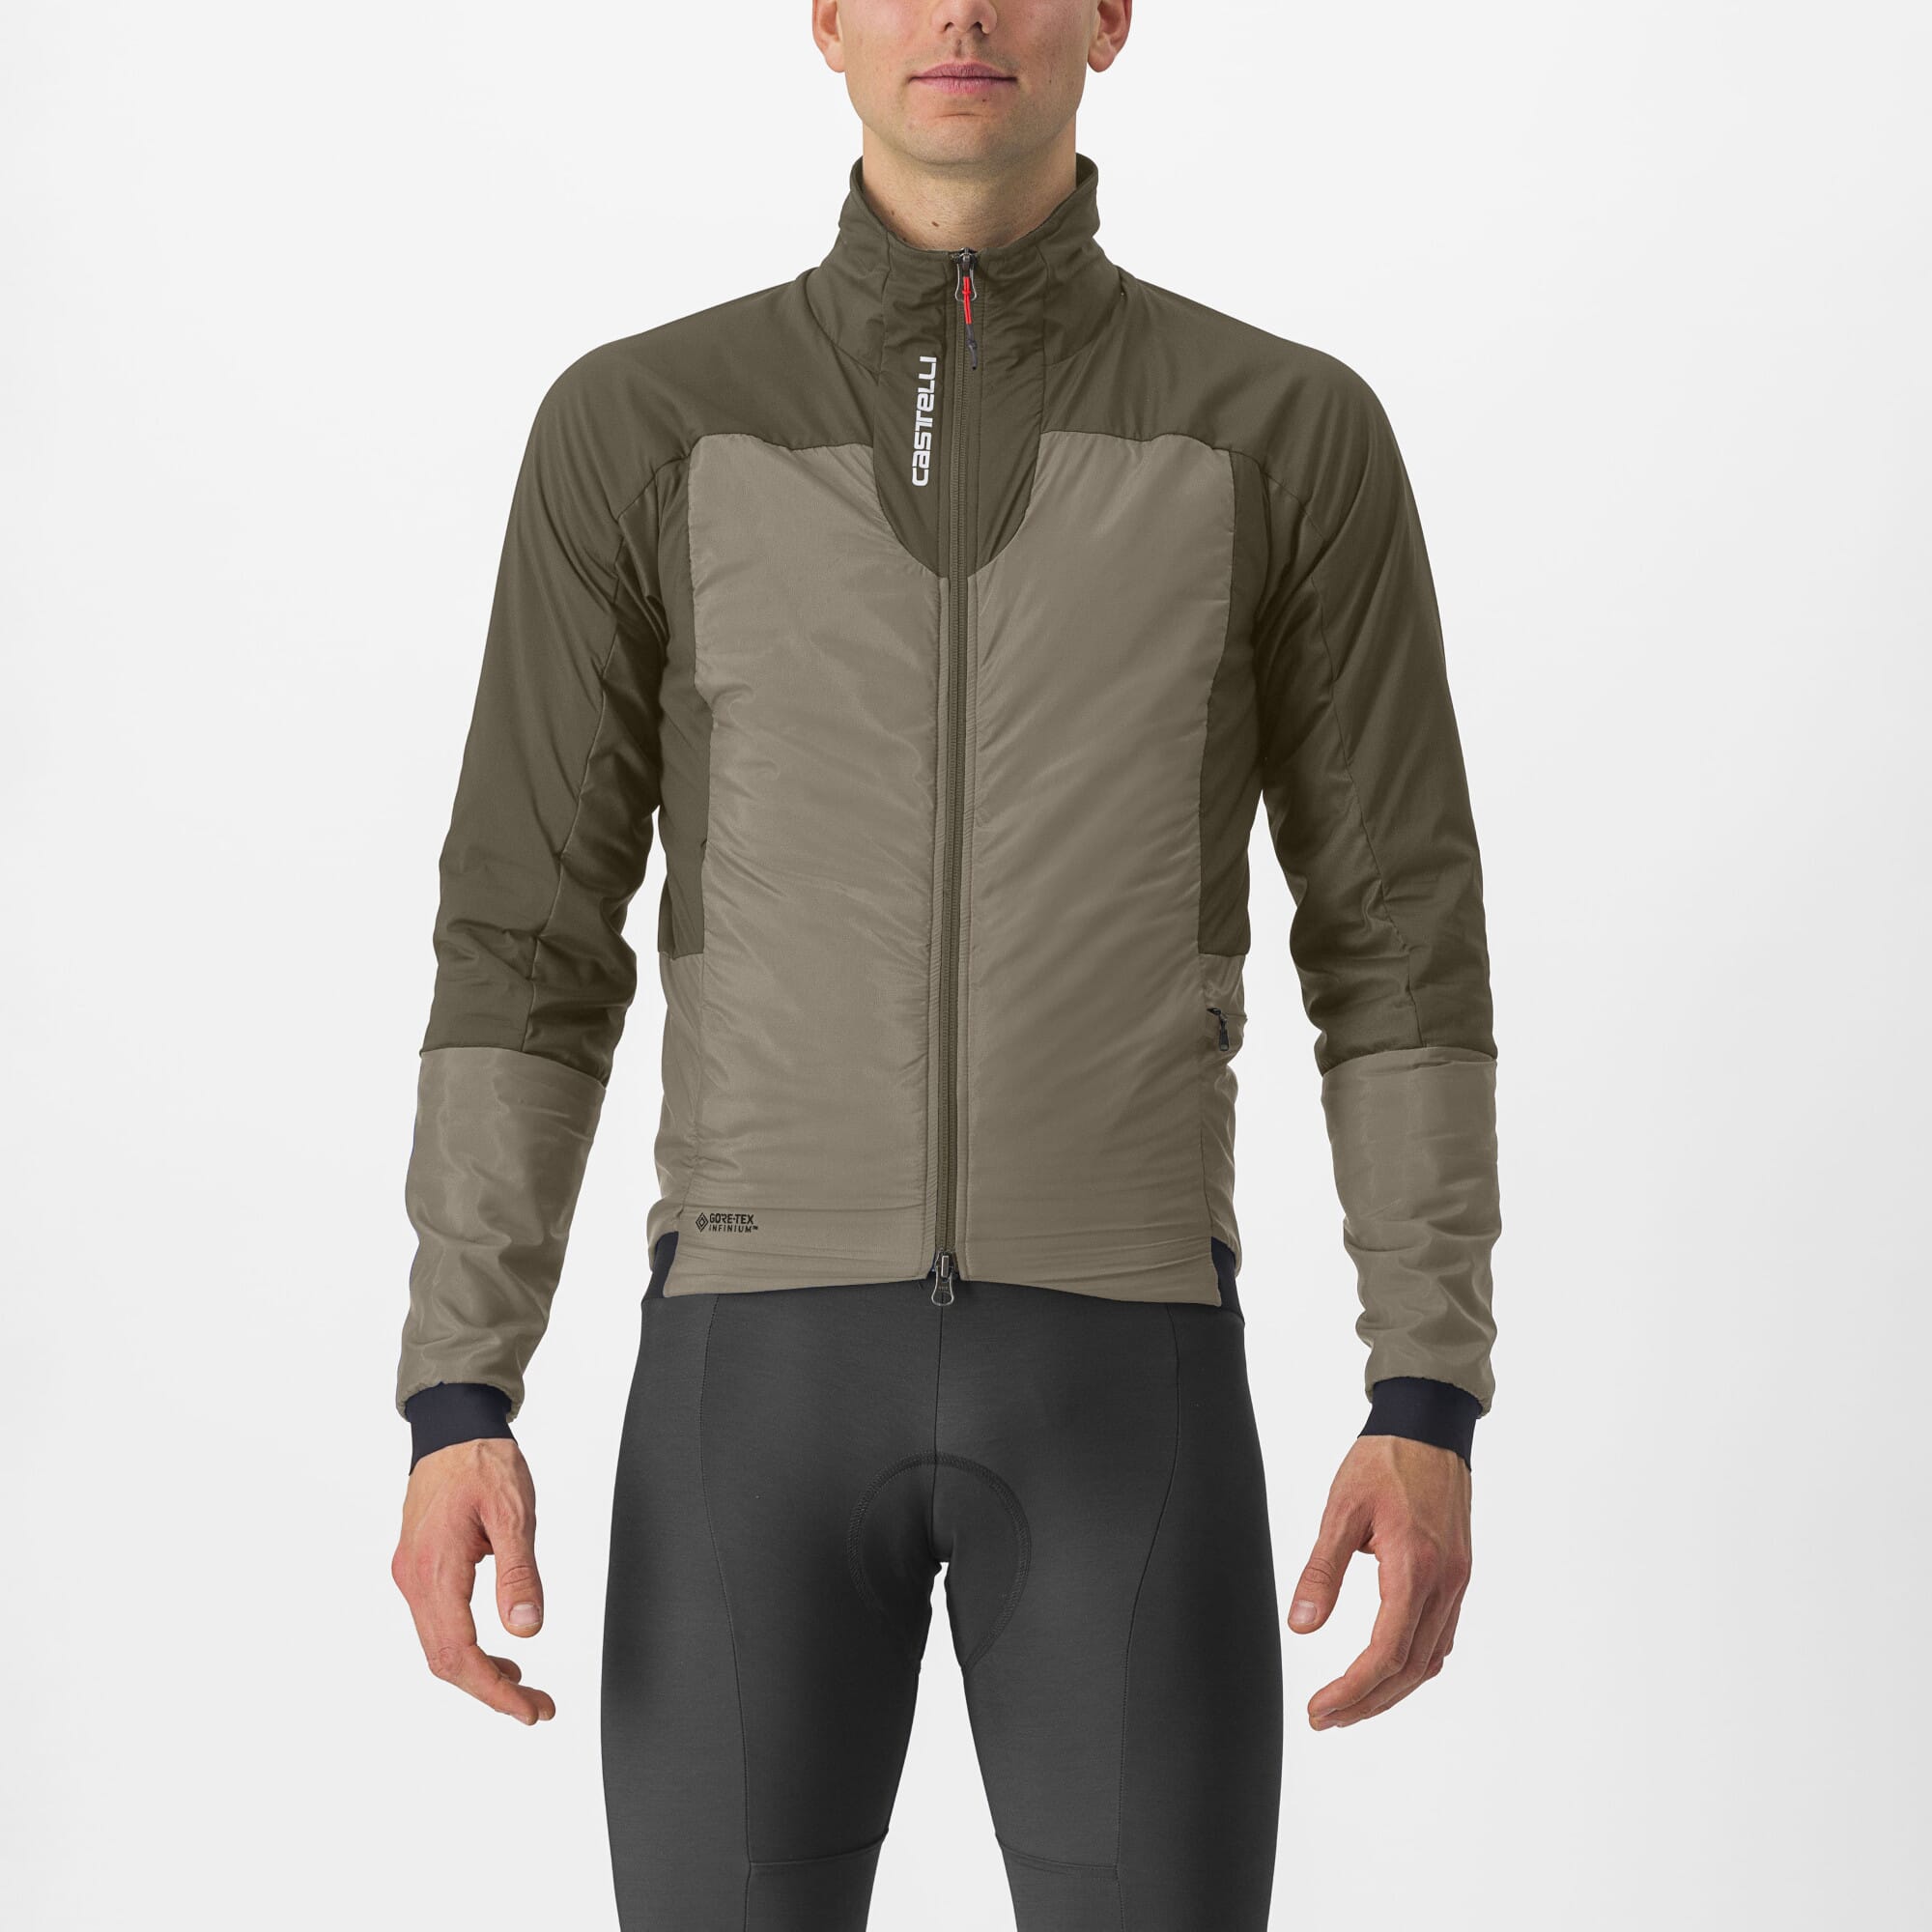 CASTELLI FLY THERMAL JACKET